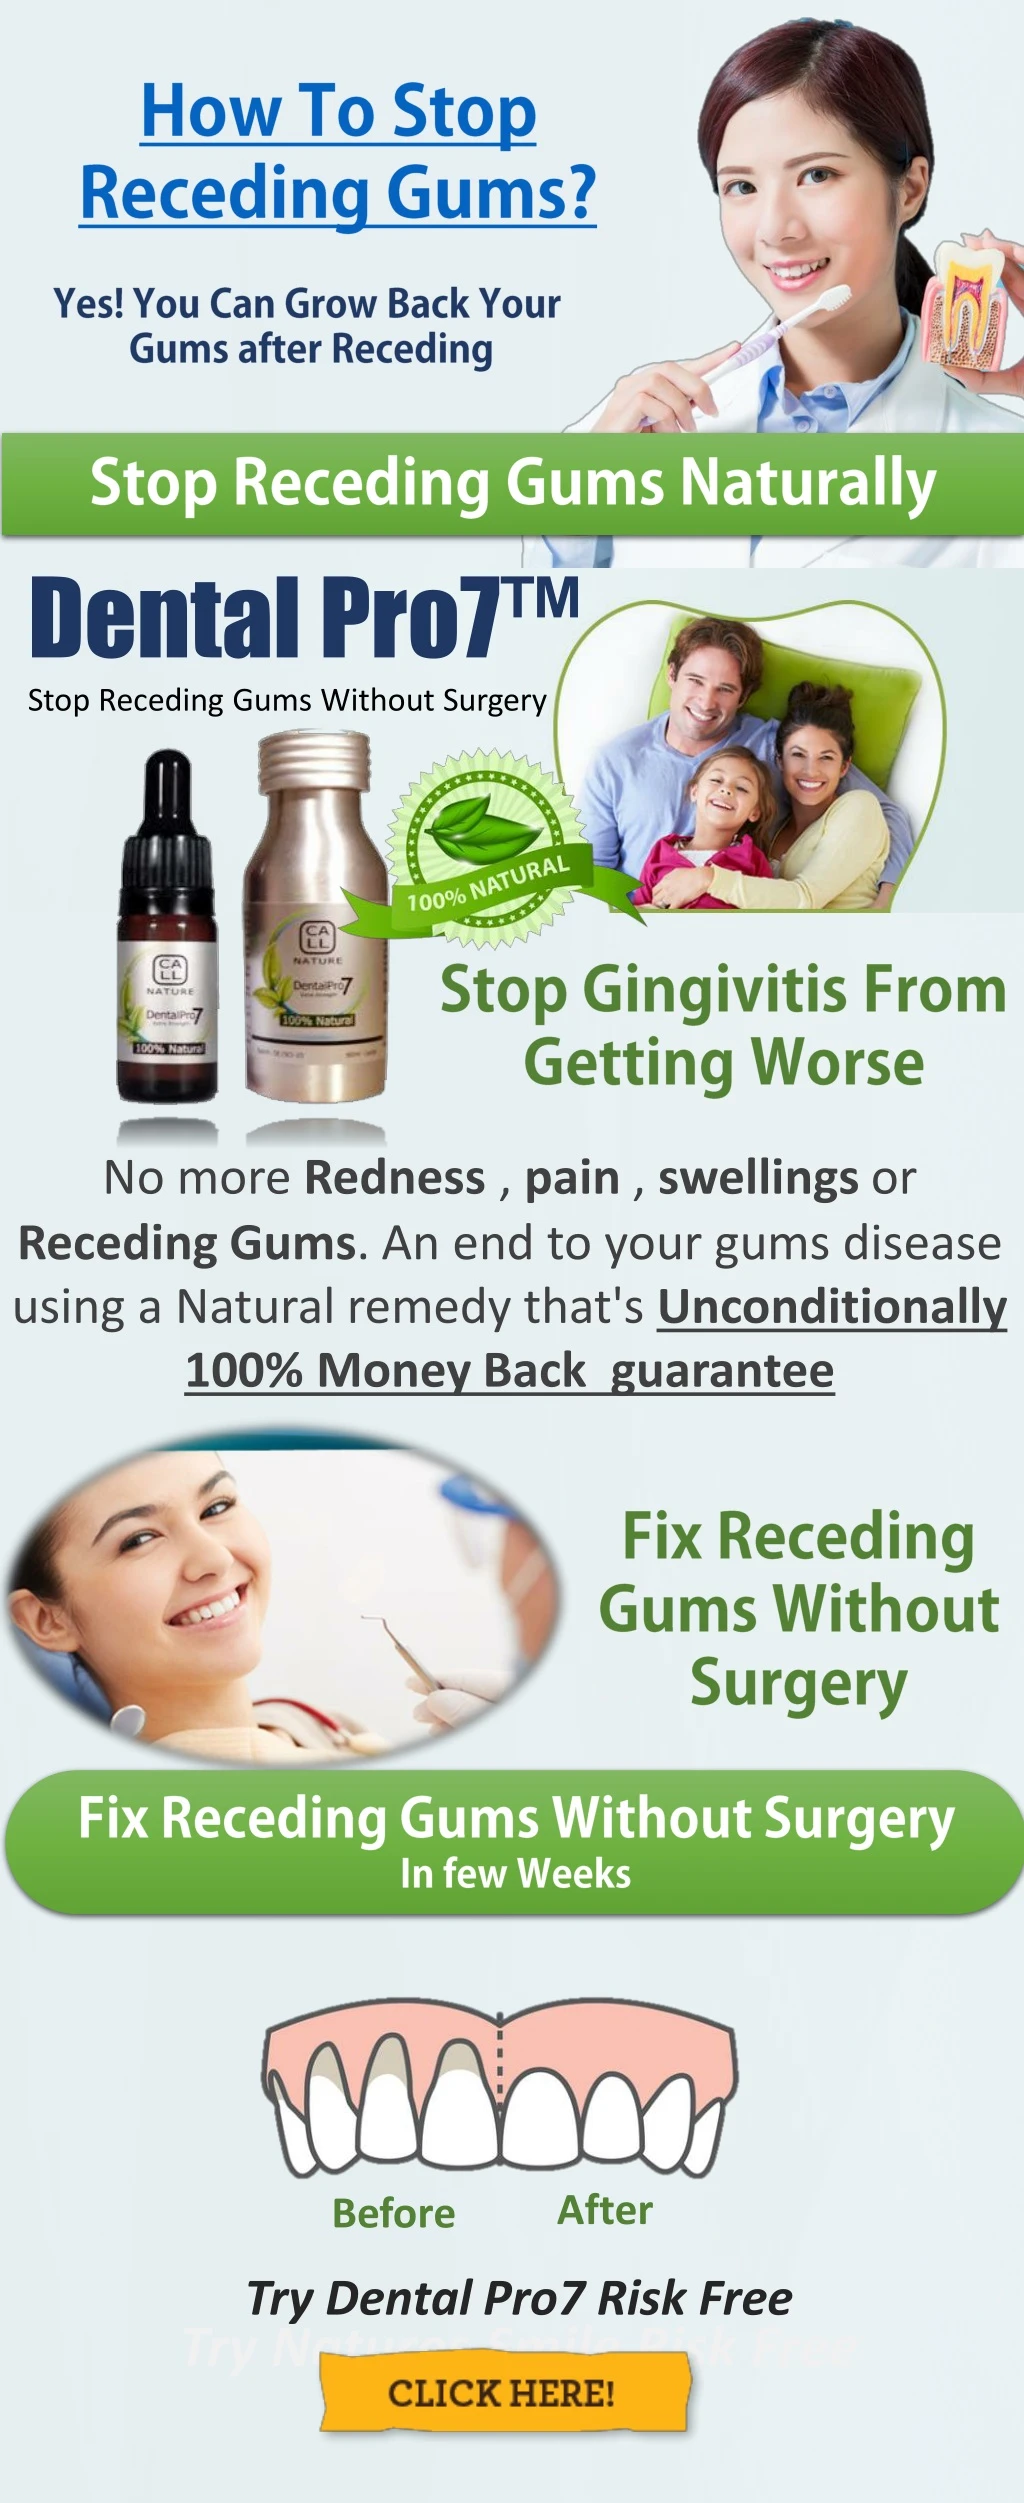 dental pro7 stop receding gums without surgery